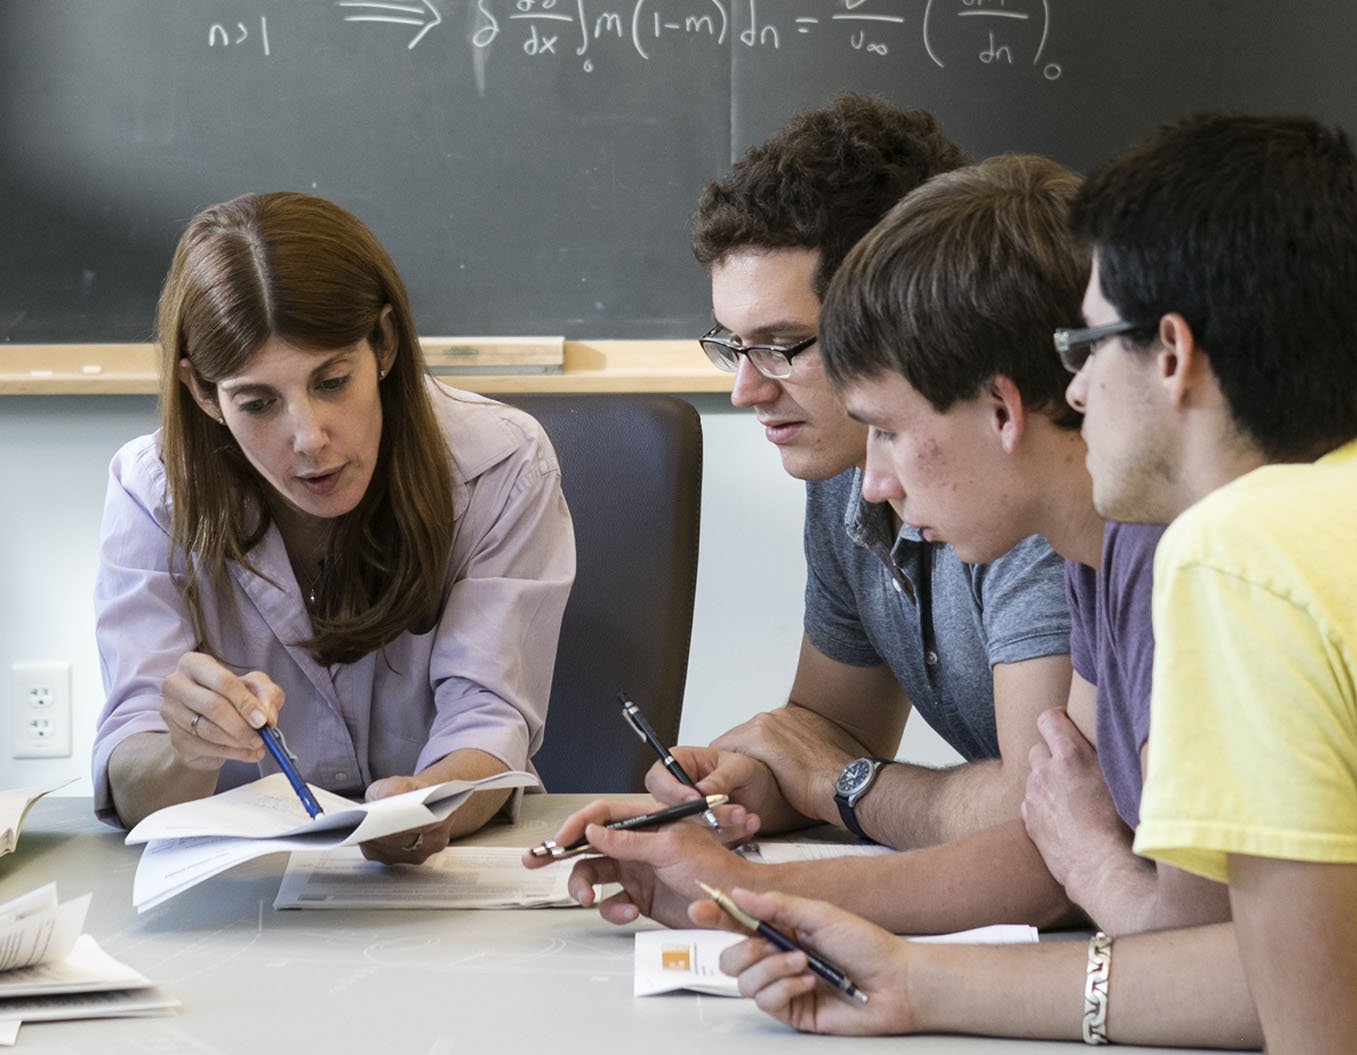 A group of Caltech students engage in a classroom discussion